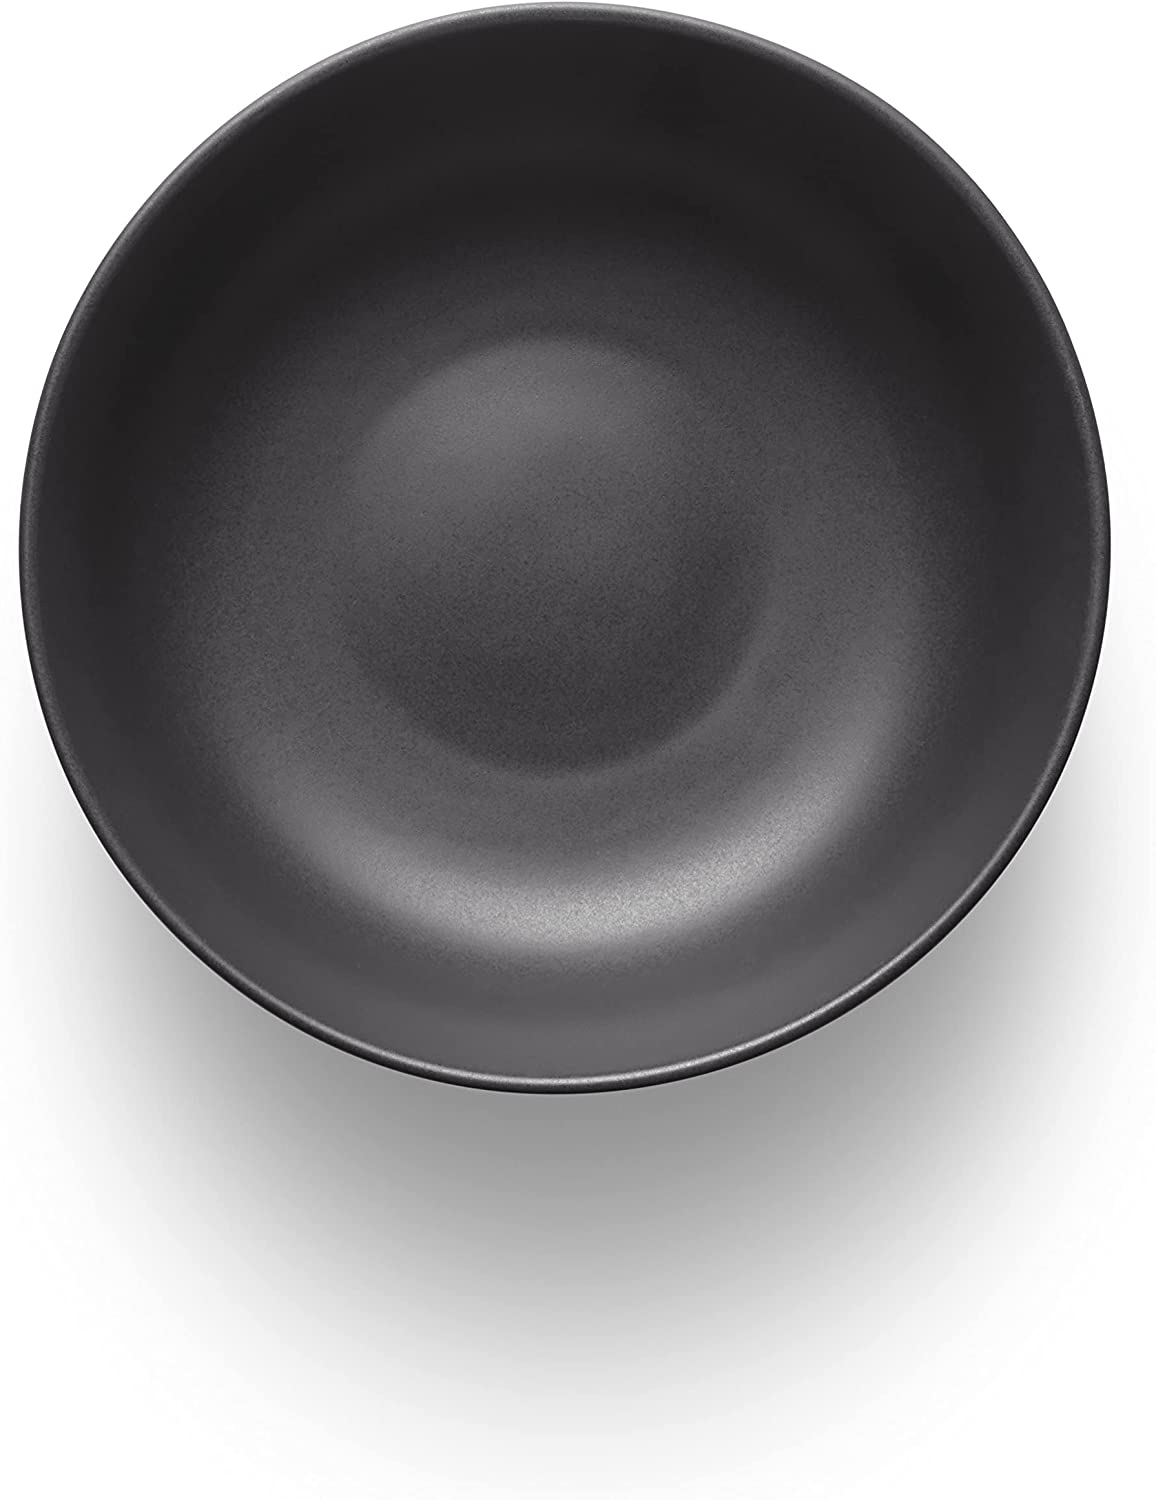 EVA SOLO Nordic kitchen bowl, 3.2 litres, suitable for everyday use, black